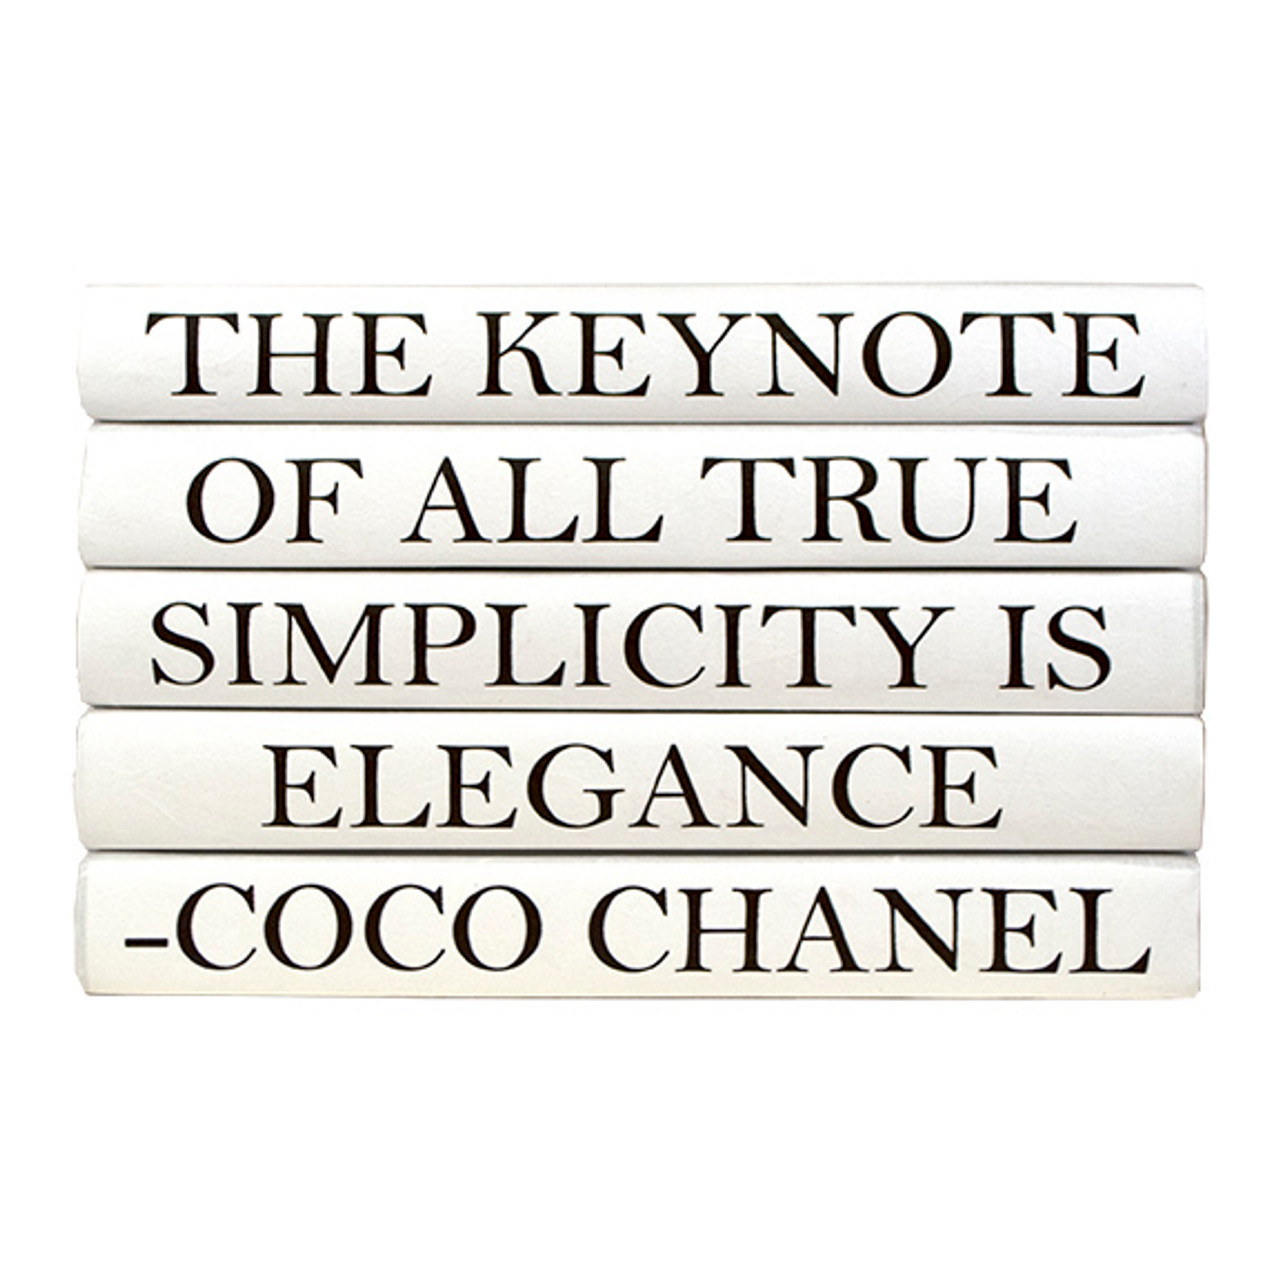 Coco Chanel's Words. “Simplicity is the keynote of all true…